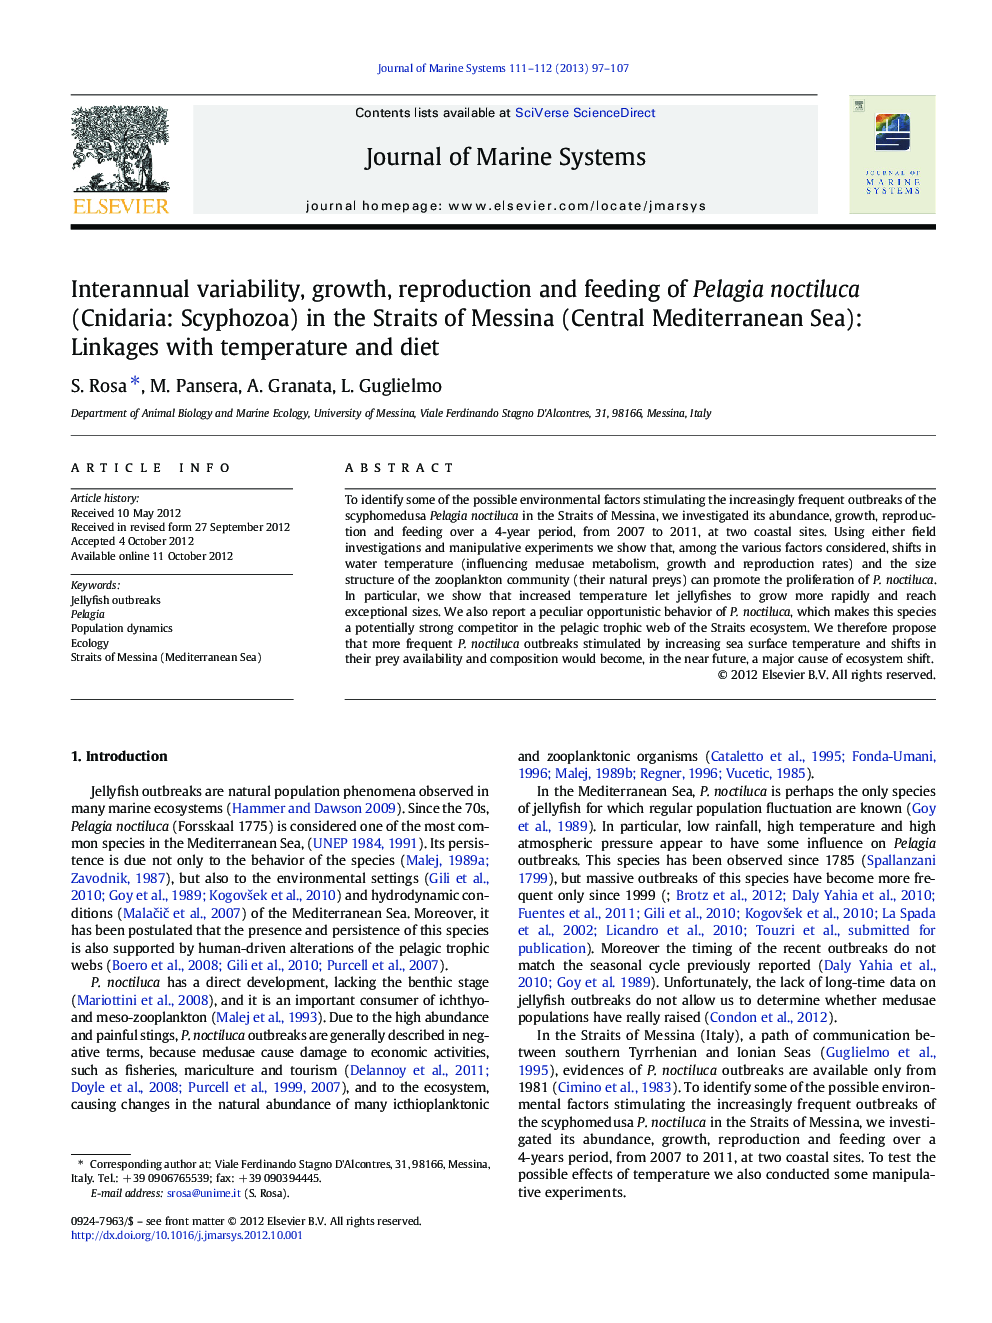 Interannual variability, growth, reproduction and feeding of Pelagia noctiluca (Cnidaria: Scyphozoa) in the Straits of Messina (Central Mediterranean Sea): Linkages with temperature and diet